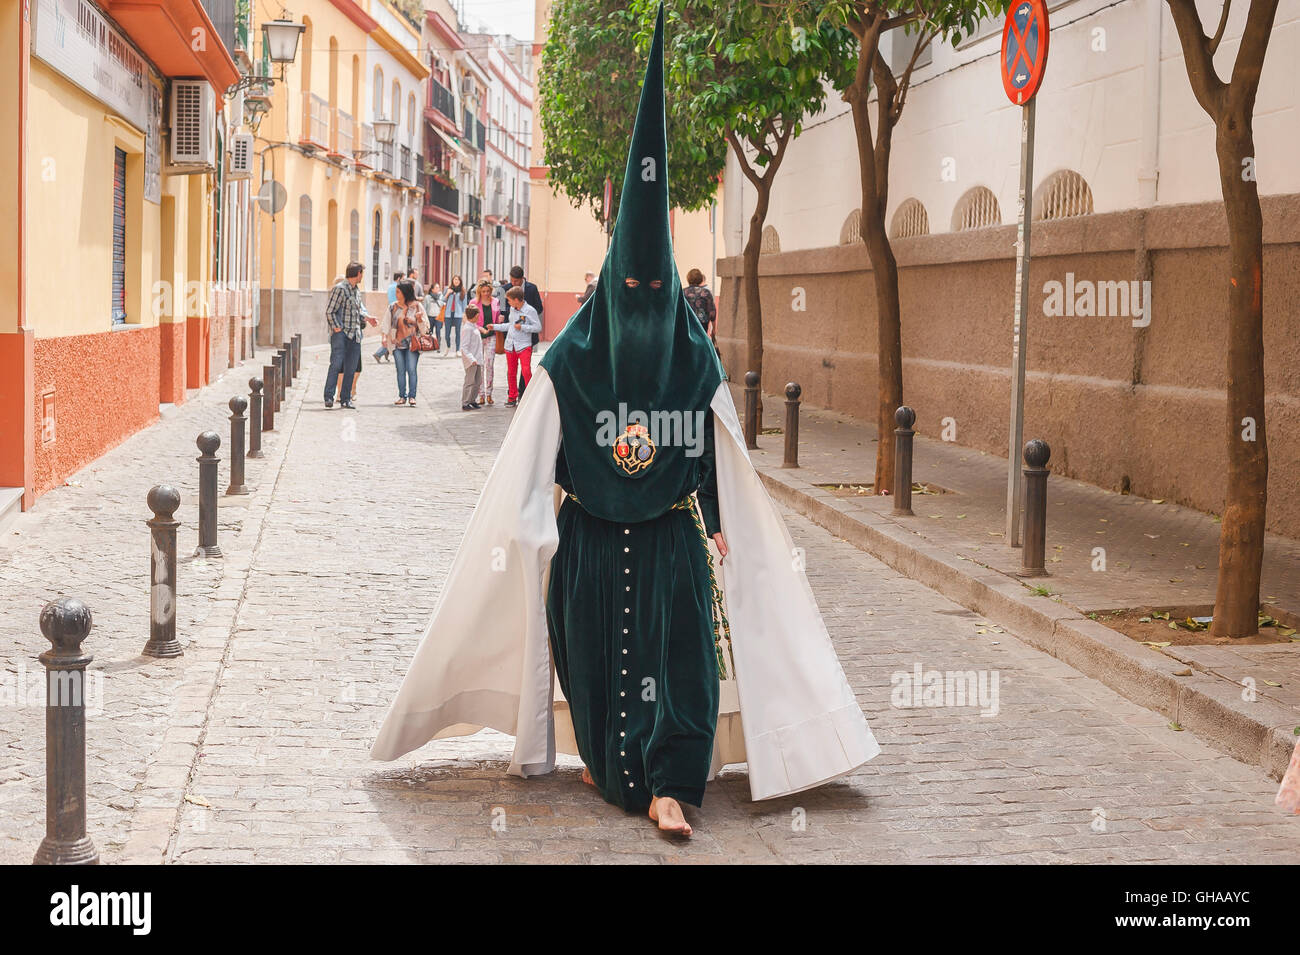 Seville Semana Santa, a member of a hooded cofradia (brotherhood) walks to attend his procession in the Easter Holy Week festival in Seville, Spain. Stock Photo